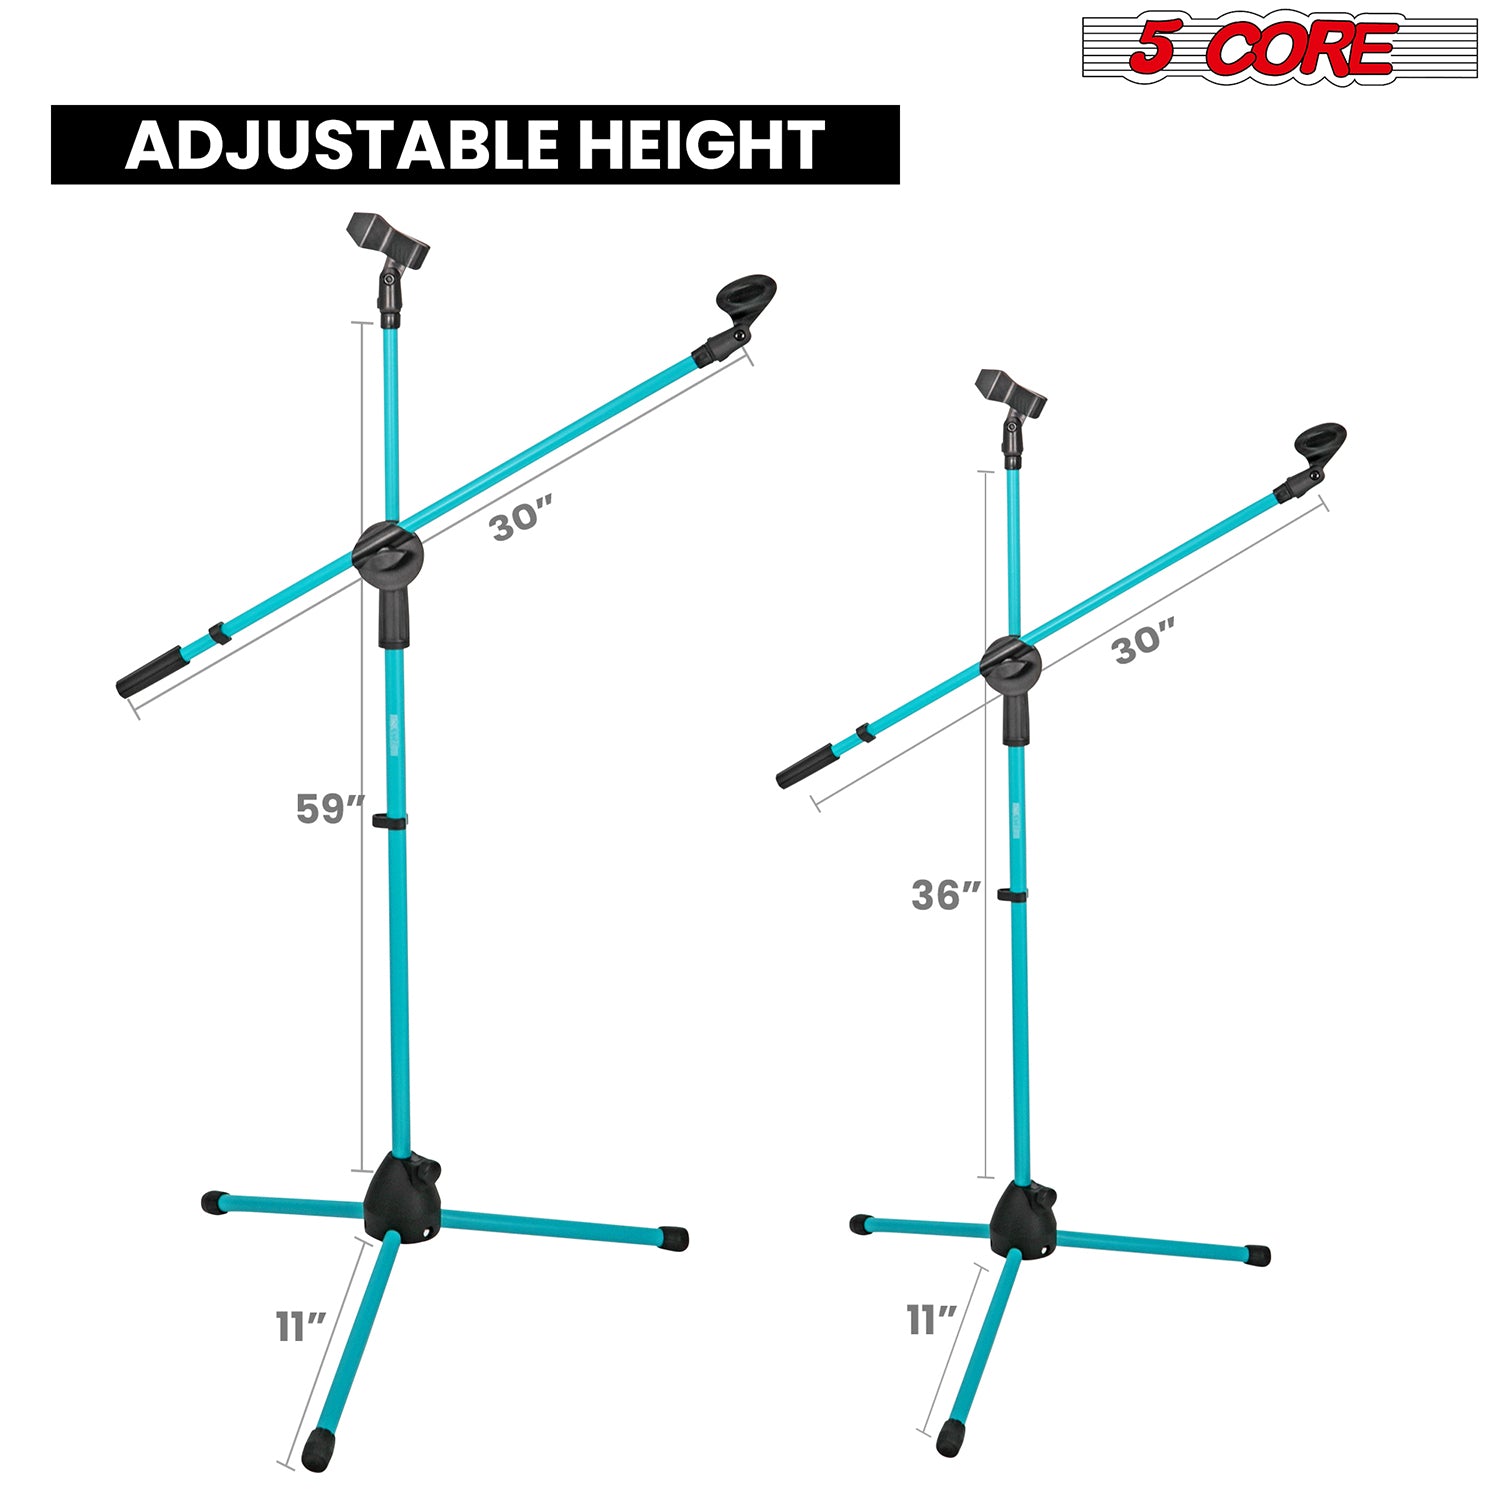 5 Core Mic Stand Collapsible Height Adjustable 31 to 59” Dual Metal Microphone Tripod Stand w Boom Arm Stand Para Microfono for Singing, Karaoke, Stage and Outdoor Activities 2Pc Sky Blue - MS DBL G SKY BLU 2pcs